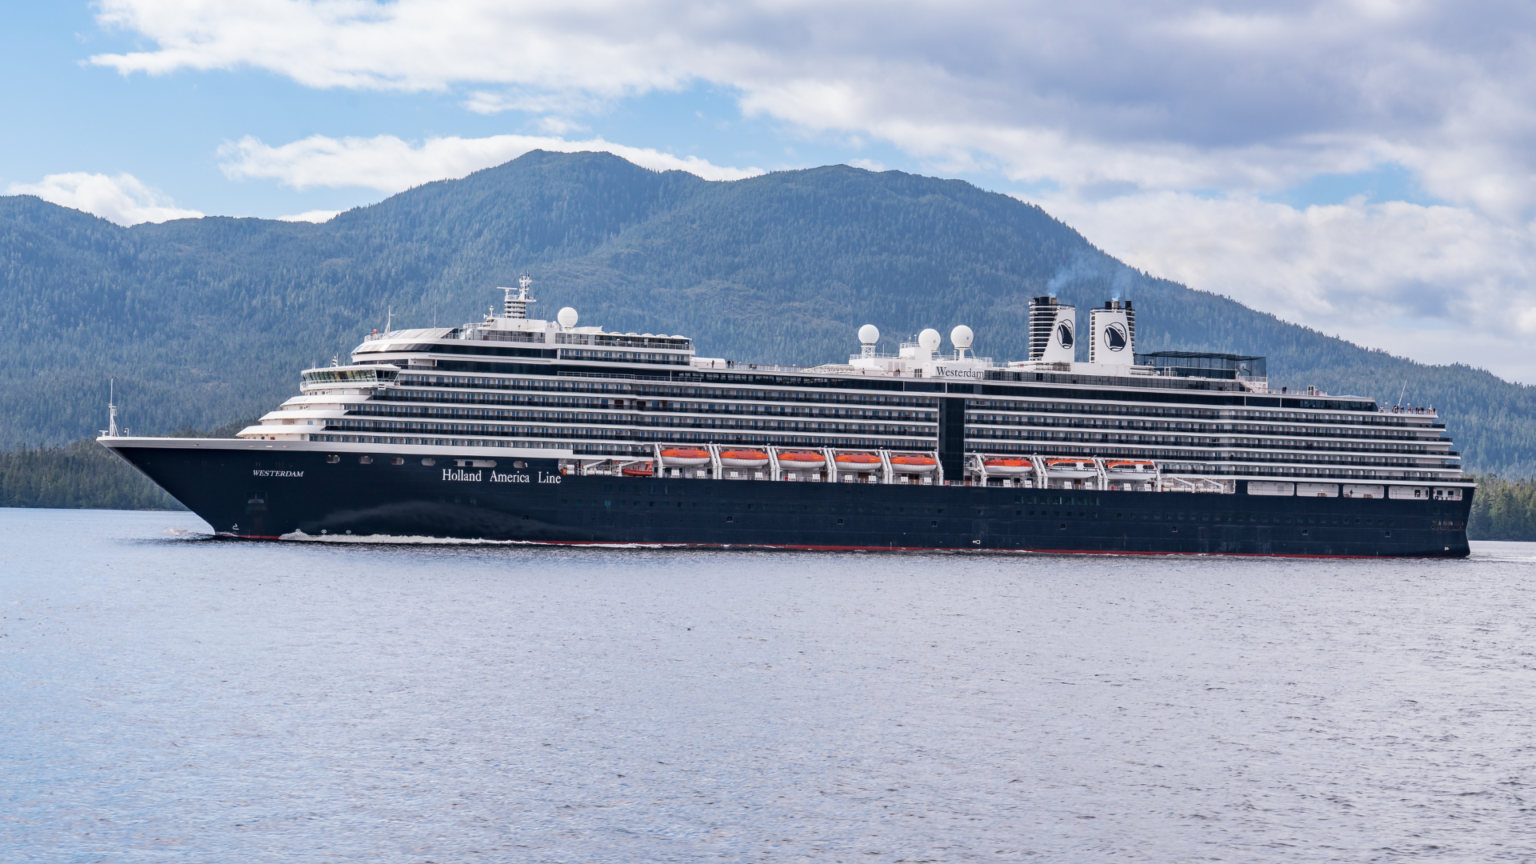 Holland America Line cruise ship on open water